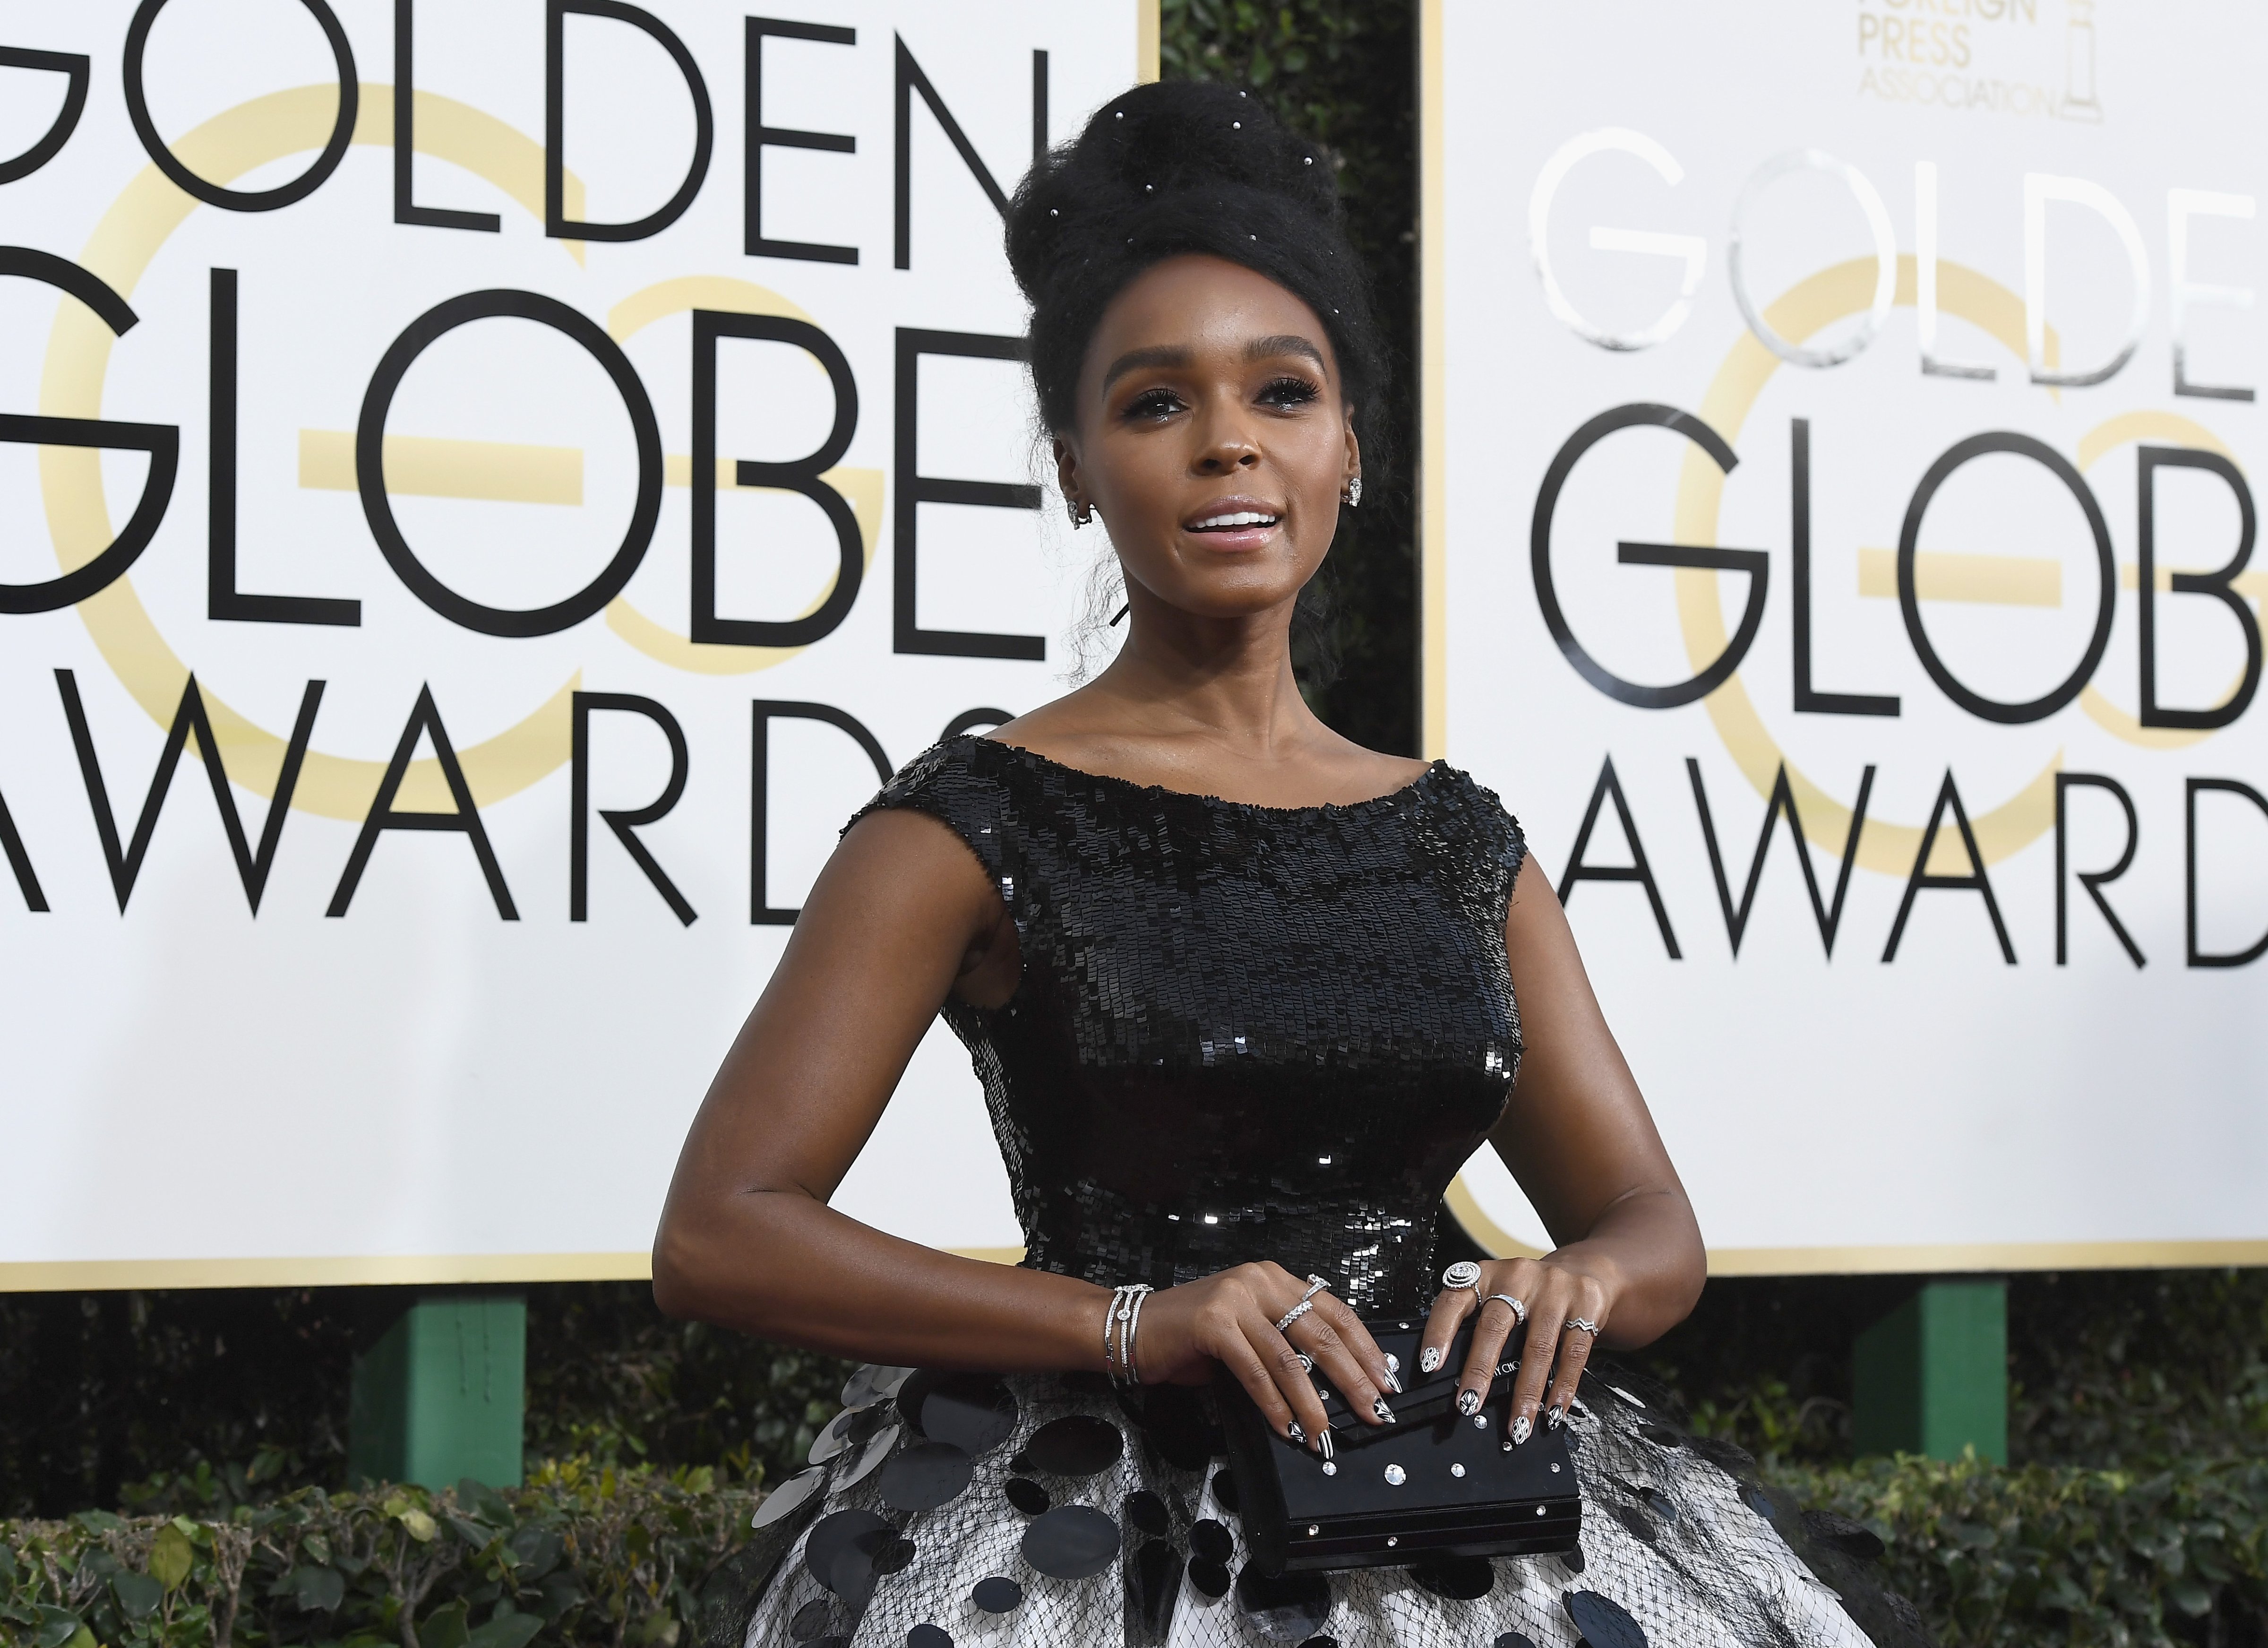 BEVERLY HILLS, CA - JANUARY 08:  74th ANNUAL GOLDEN GLOBE AWARDS -- Pictured: Singer Janelle Monae arrives to the 74th Annual Golden Globe Awards held at the Beverly Hilton Hotel on January 8, 2017.  (Photo by Kevork Djansezian/NBC/NBCU Photo Bank via Getty Images) (Kevork Djansezian/NBC—NBCU Photo Bank via Getty Images via Getty Images)